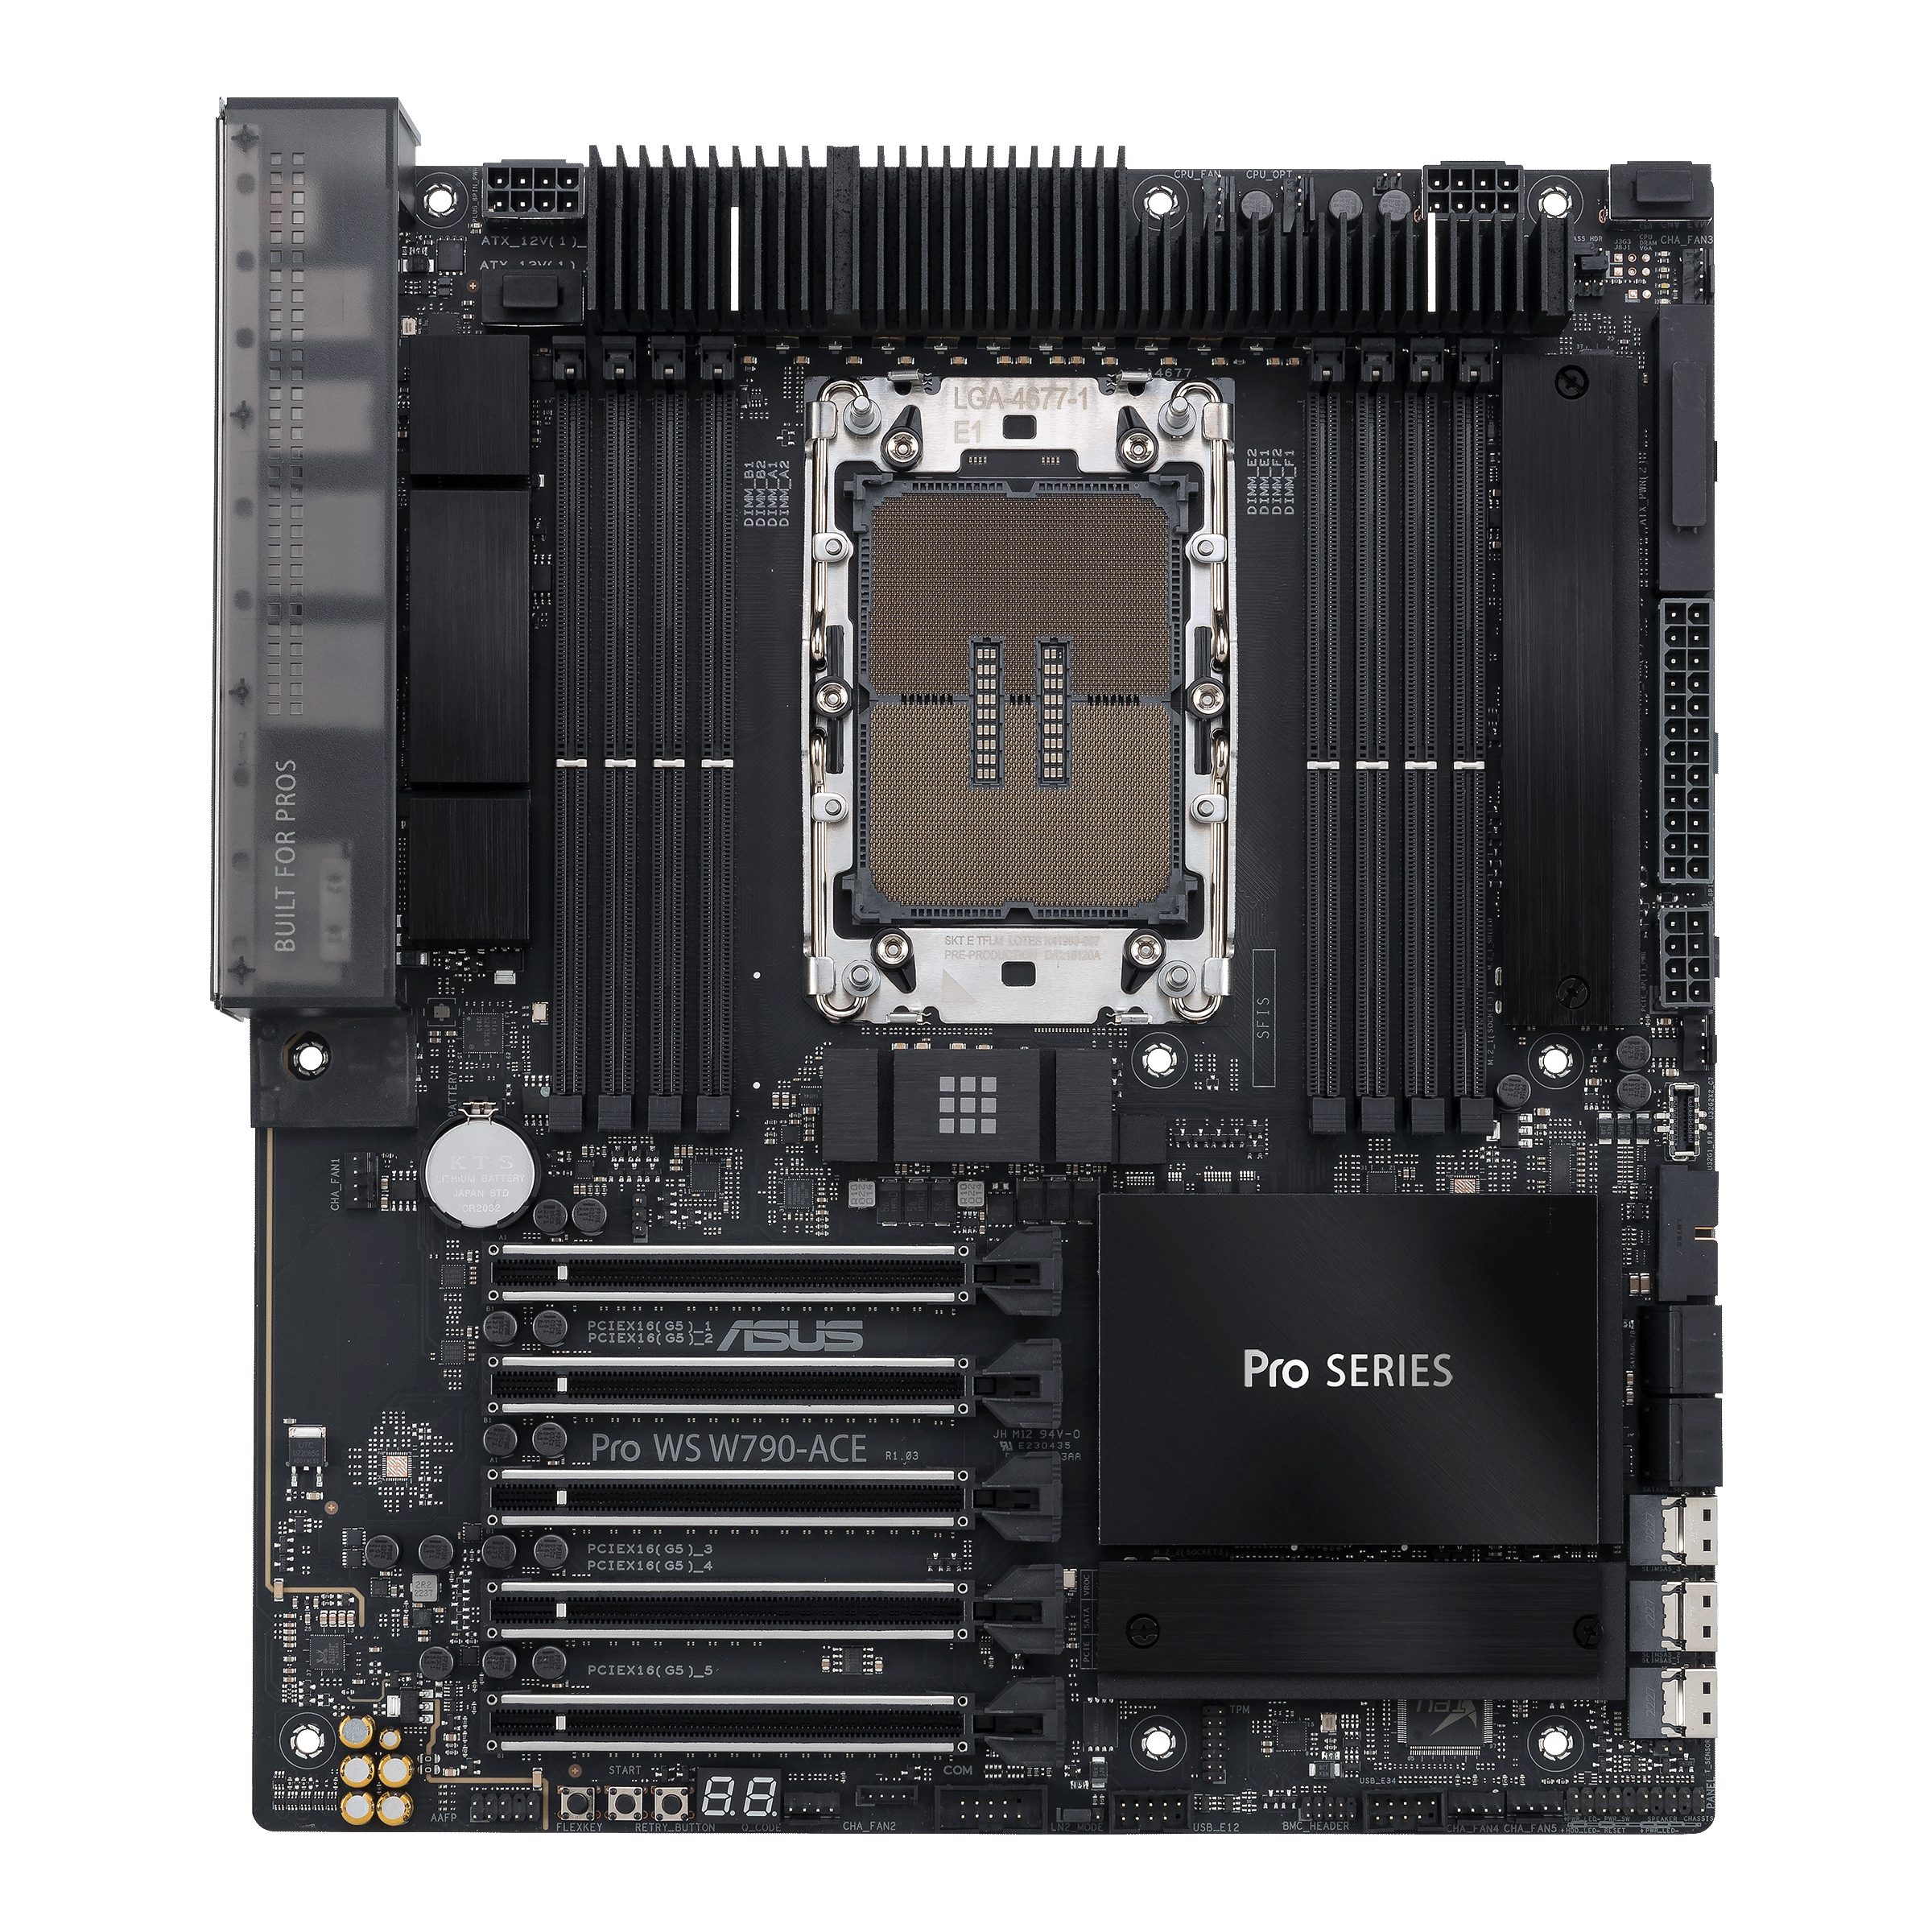 Pro WS W790-ACE｜Motherboards｜ASUS Global